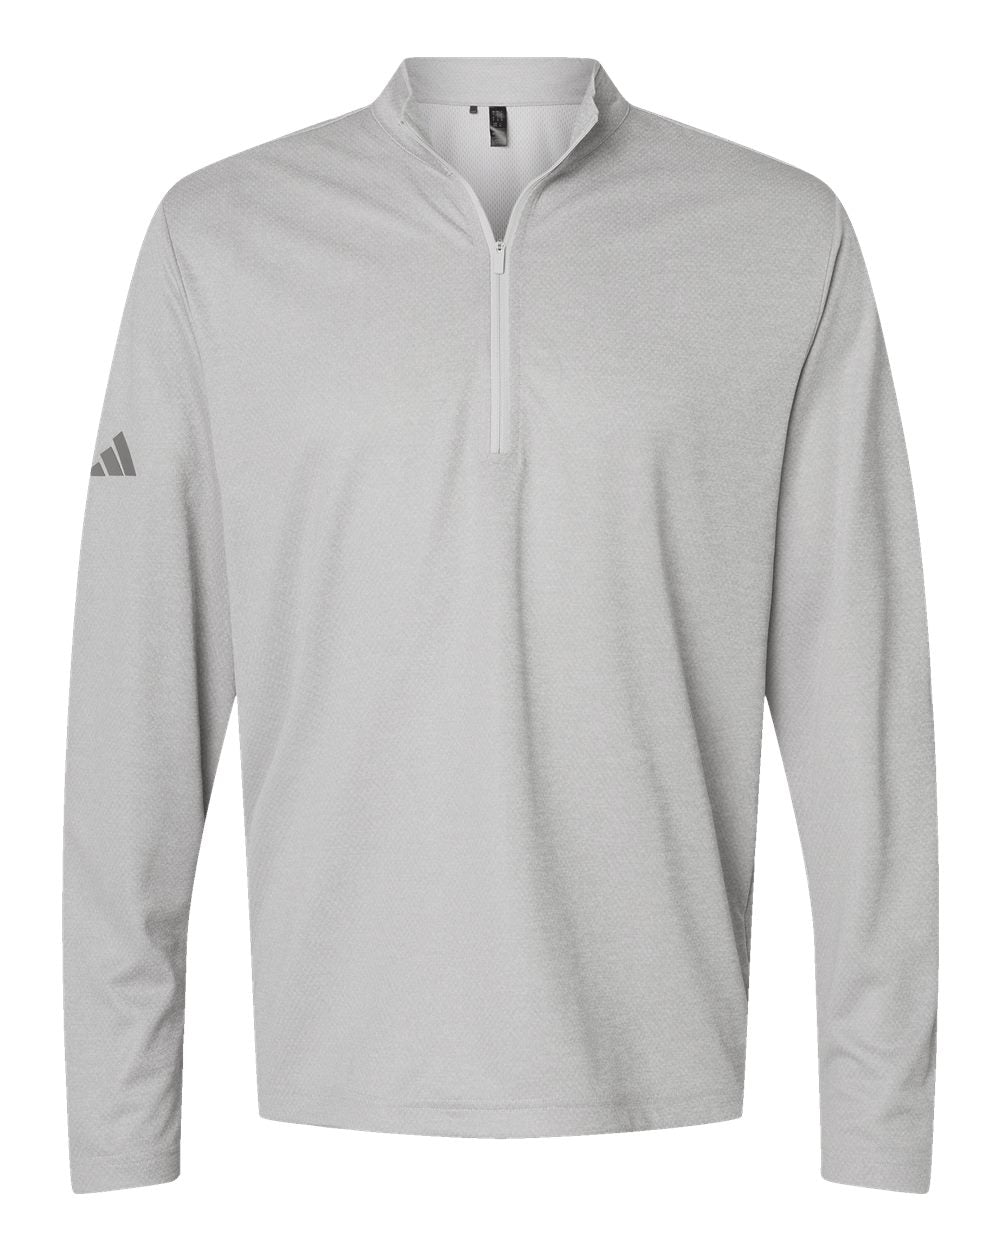 Adidas A593 Space Dyed Quarter-Zip Pullover #color_Grey One Heather